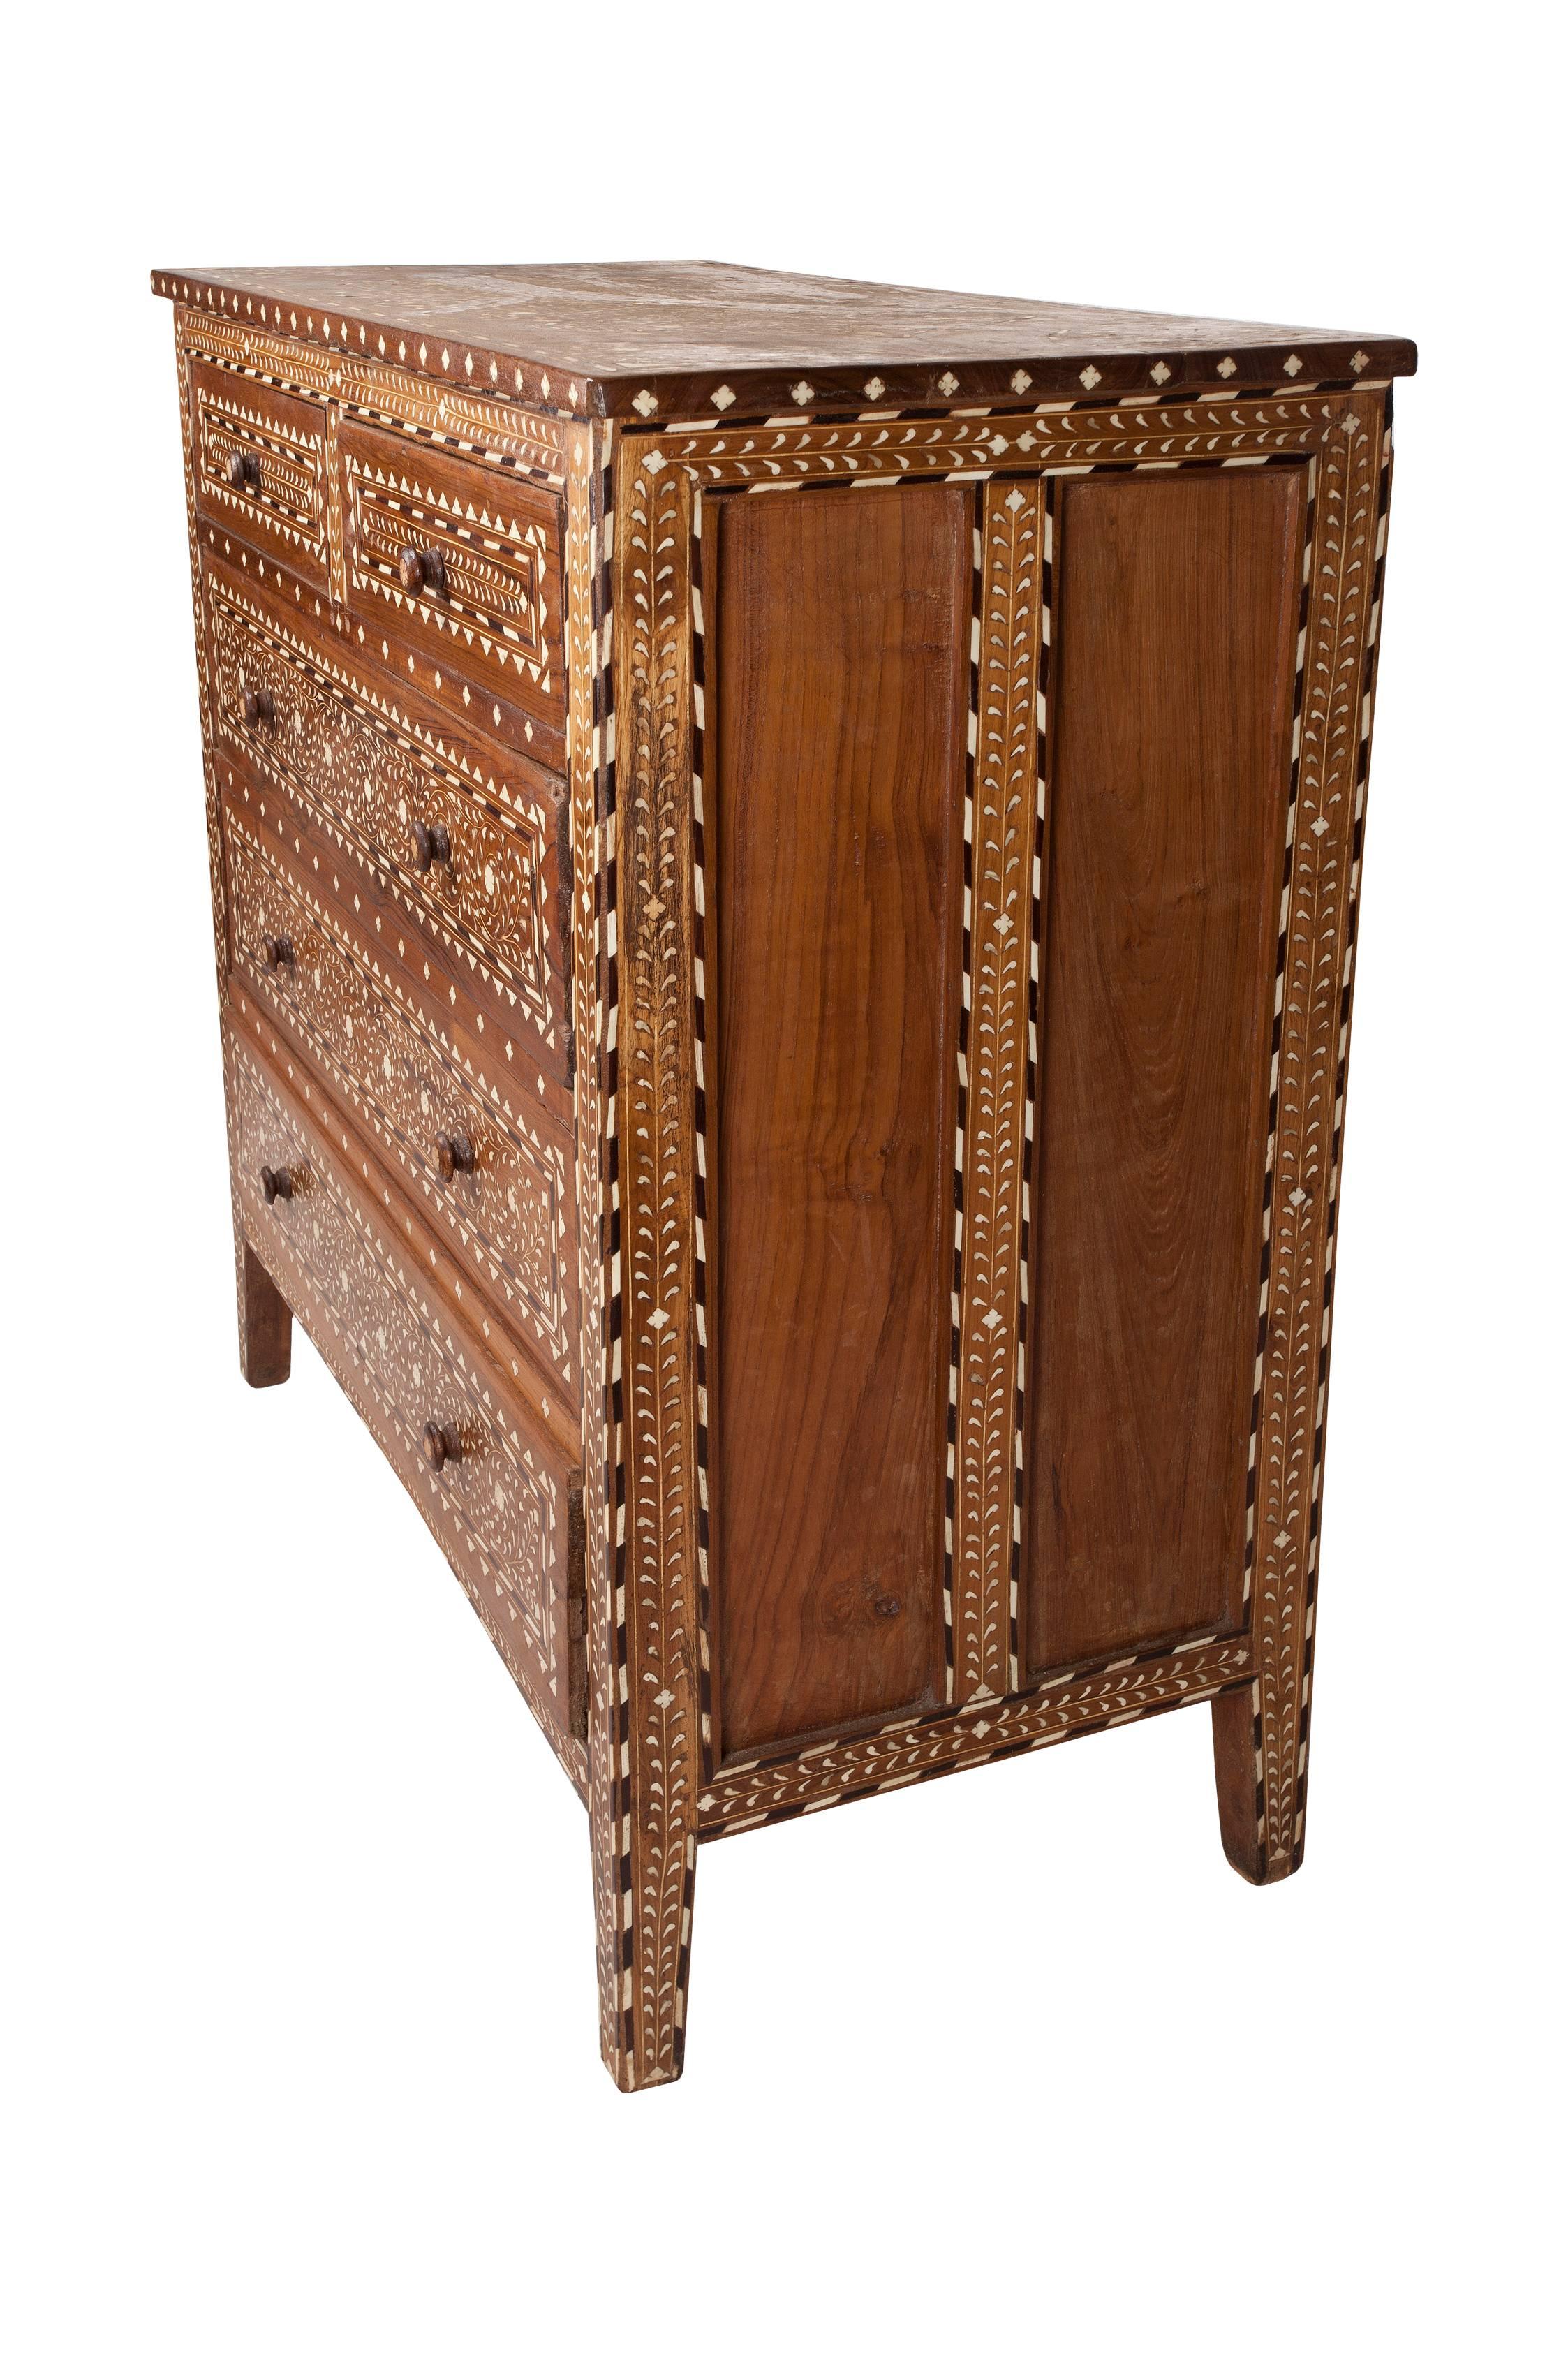 Early 1900s, teak chest of drawers with exceptional and intricate bone and rosewood inlay, India. Two over three drawer configuration with wood and inlay drawer pulls. The small size and detail of the inlay work is incredible.